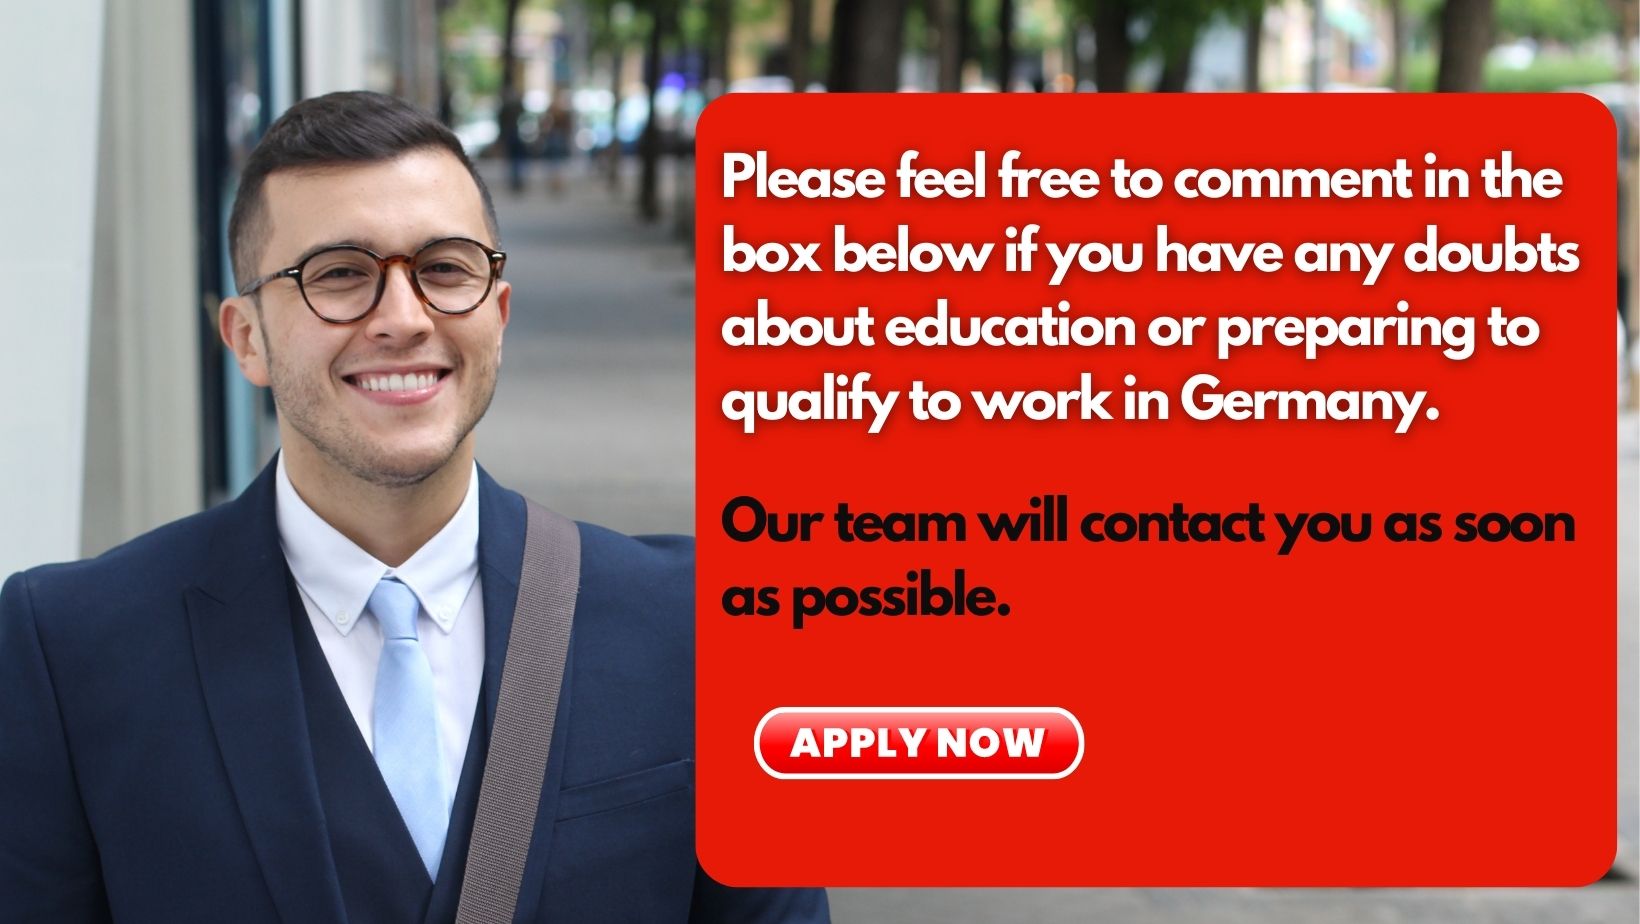 How to Apply for Ausbildung